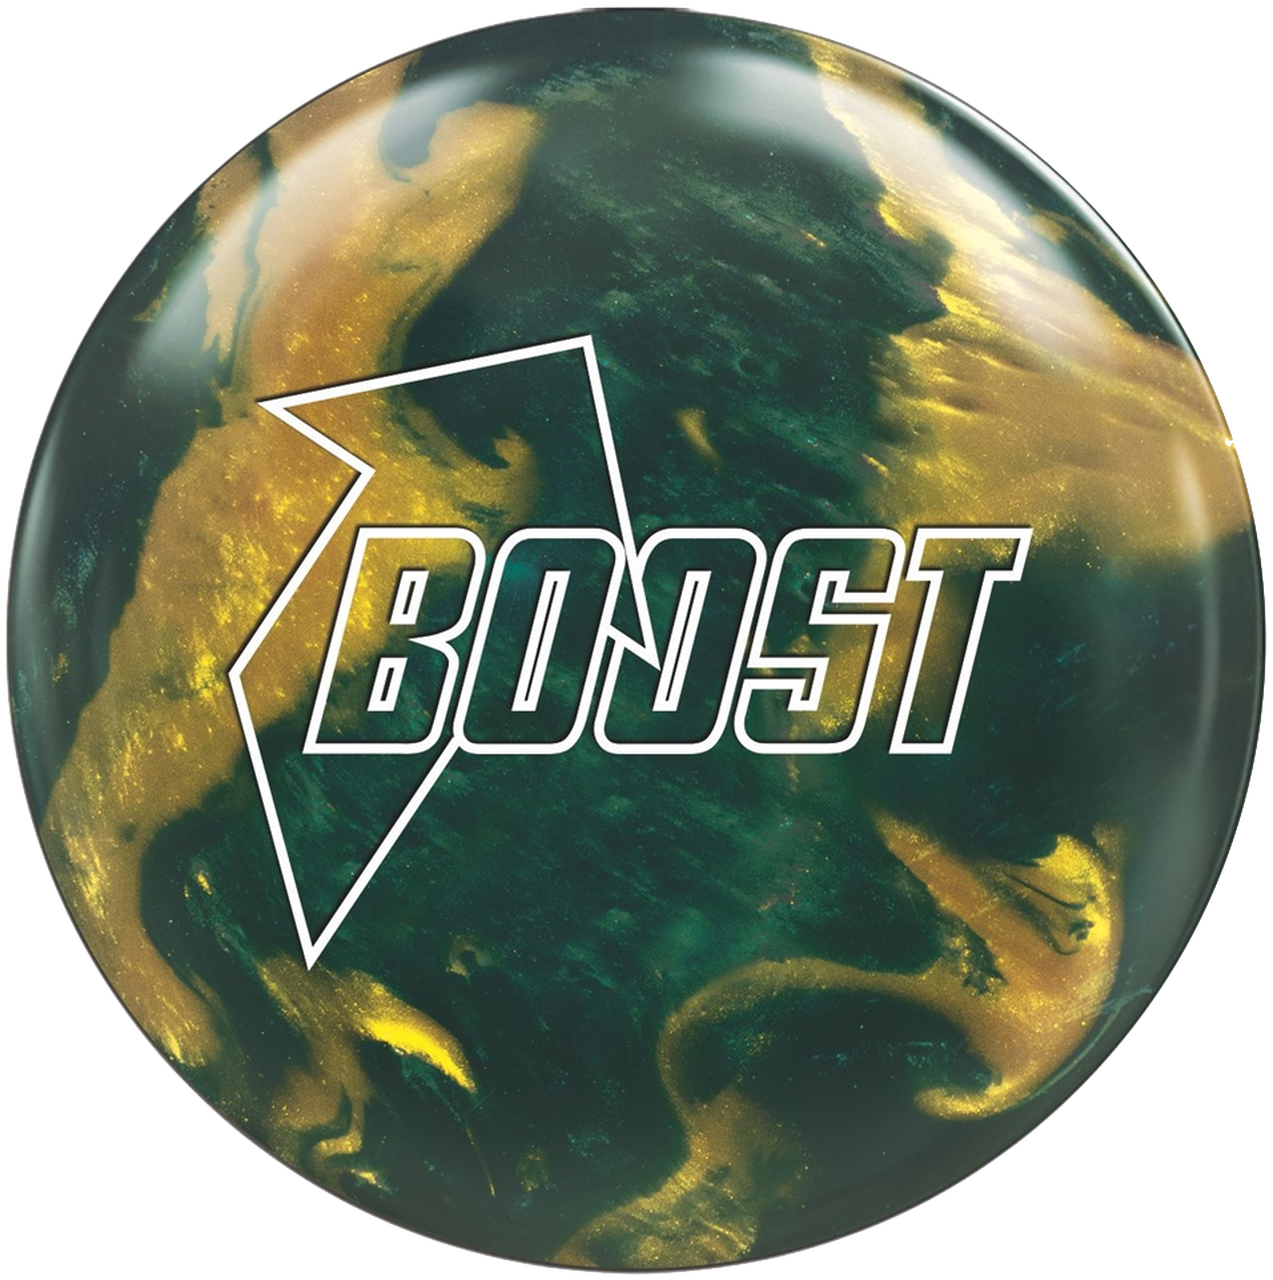 Boost Logo Marble Texture PNG image